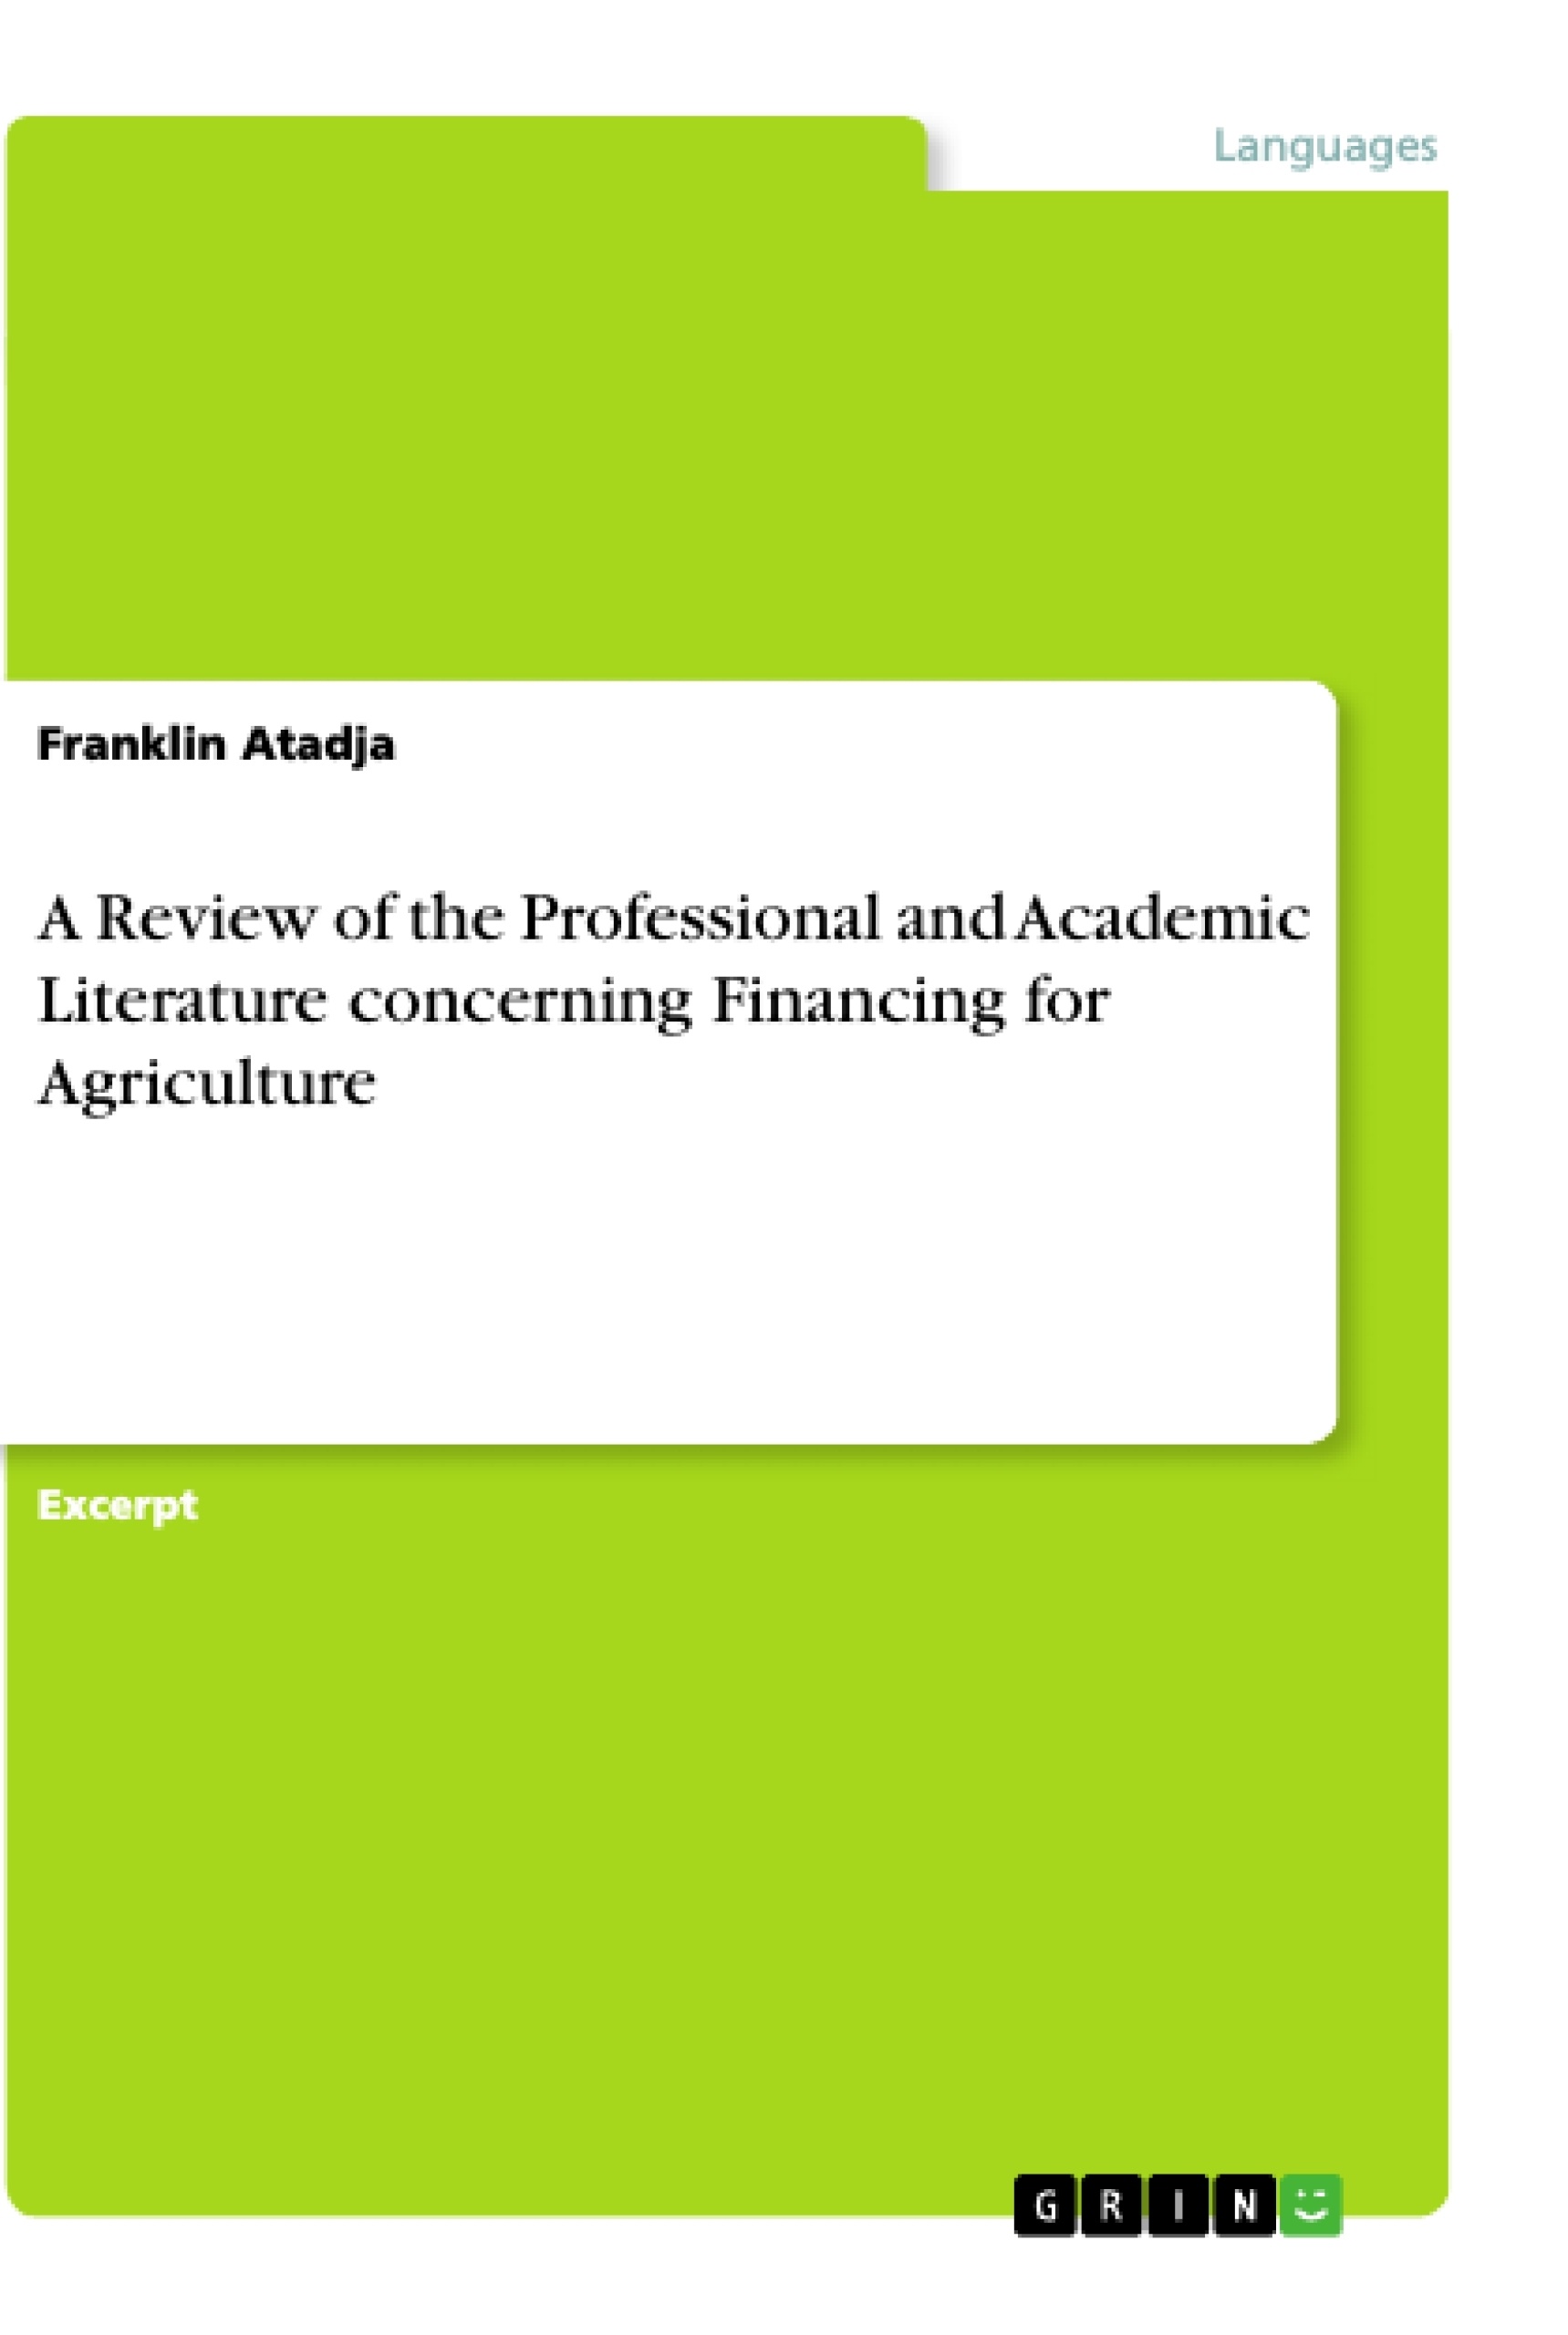 Titre: A Review of the Professional and Academic Literature concerning Financing for Agriculture